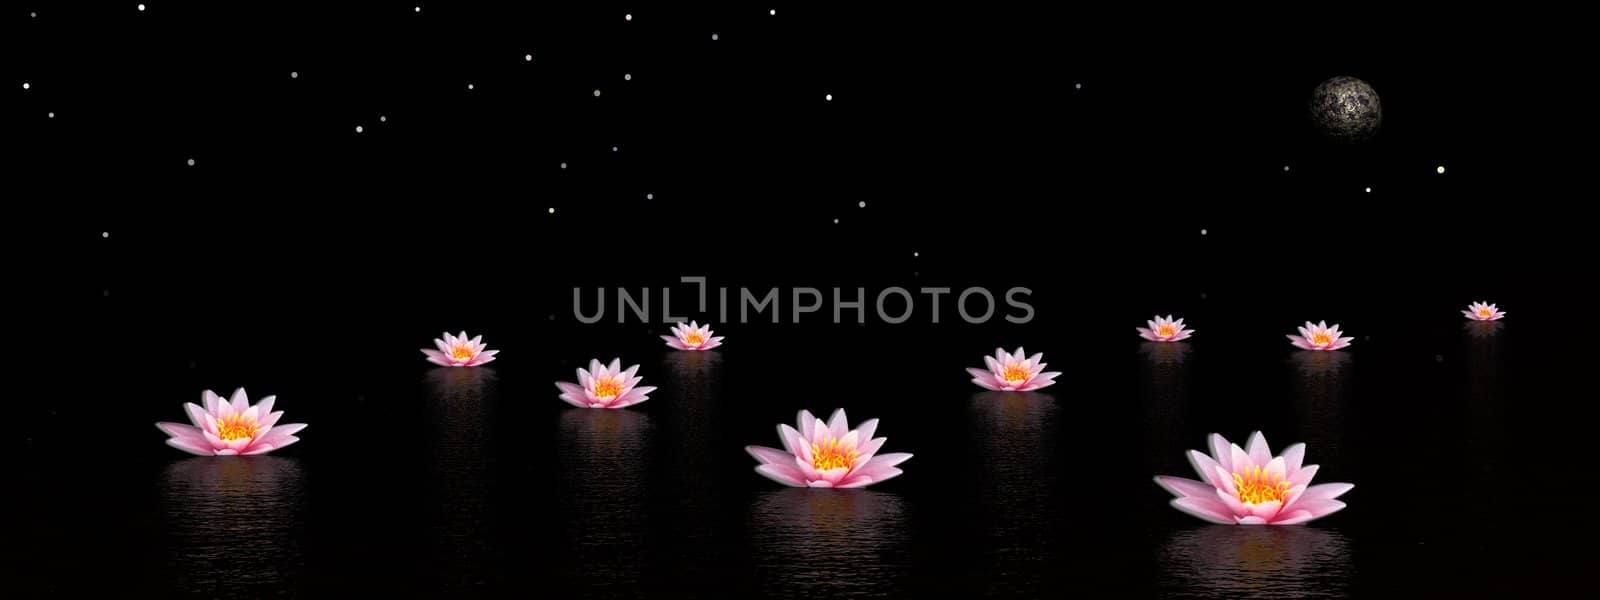 Lily flowers by night by Elenaphotos21